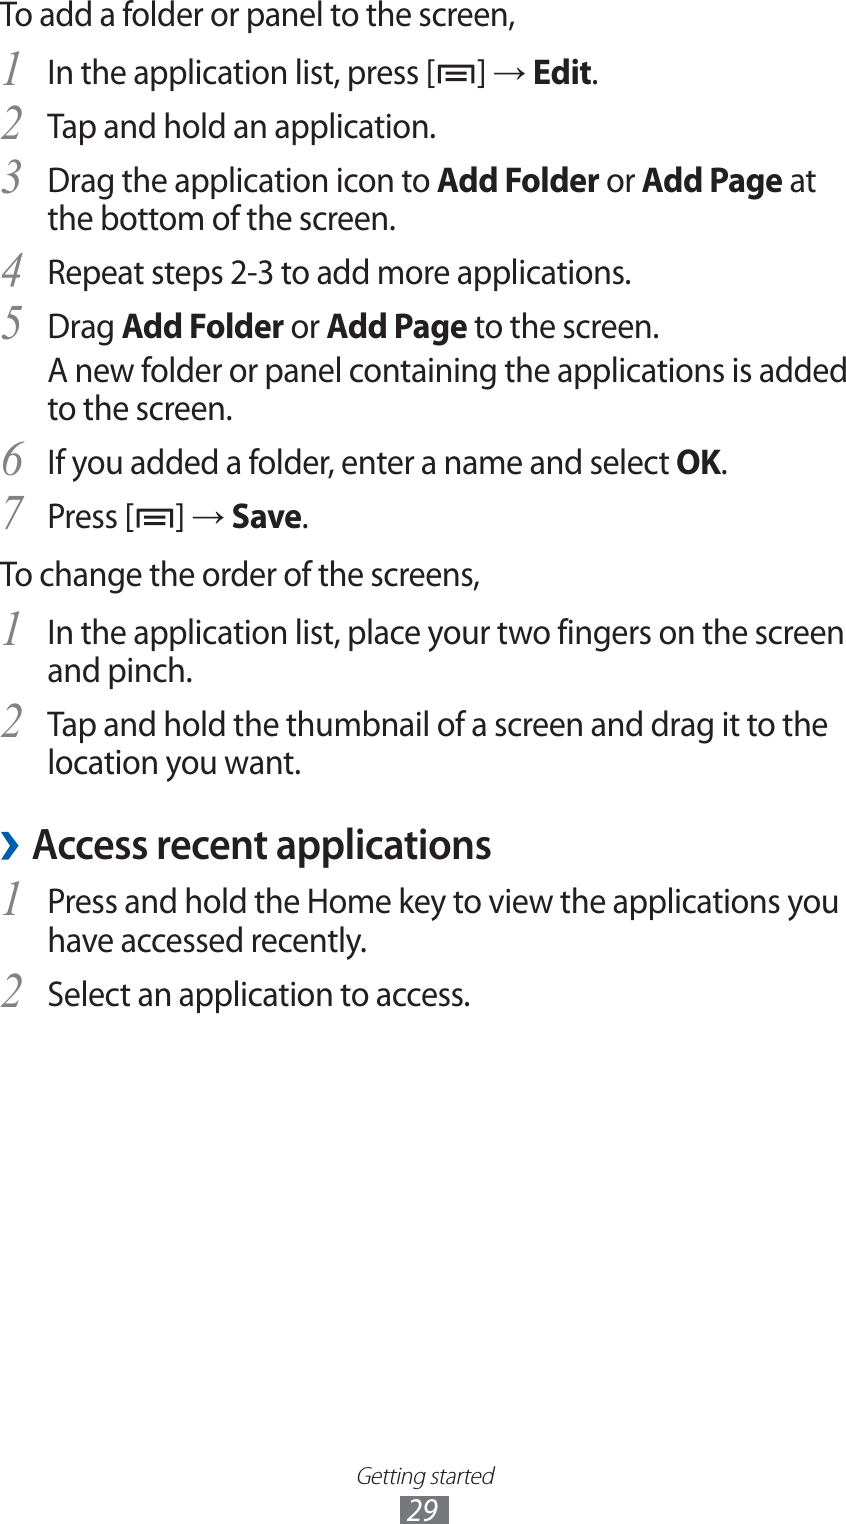 Getting started29To add a folder or panel to the screen,In the application list, press [1 ] → Edit.Tap and hold an application.2 Drag the application icon to 3 Add Folder or Add Page at the bottom of the screen.Repeat steps 2-3 to add more applications.4 Drag 5 Add Folder or Add Page to the screen.A new folder or panel containing the applications is added to the screen.If you added a folder, enter a name and select 6 OK.Press [7 ] → Save.To change the order of the screens,In the application list, place your two fingers on the screen 1 and pinch.Tap and hold the thumbnail of a screen and drag it to the 2 location you want.Access recent applications ›Press and hold the Home key to view the applications you 1 have accessed recently.Select an application to access.2 